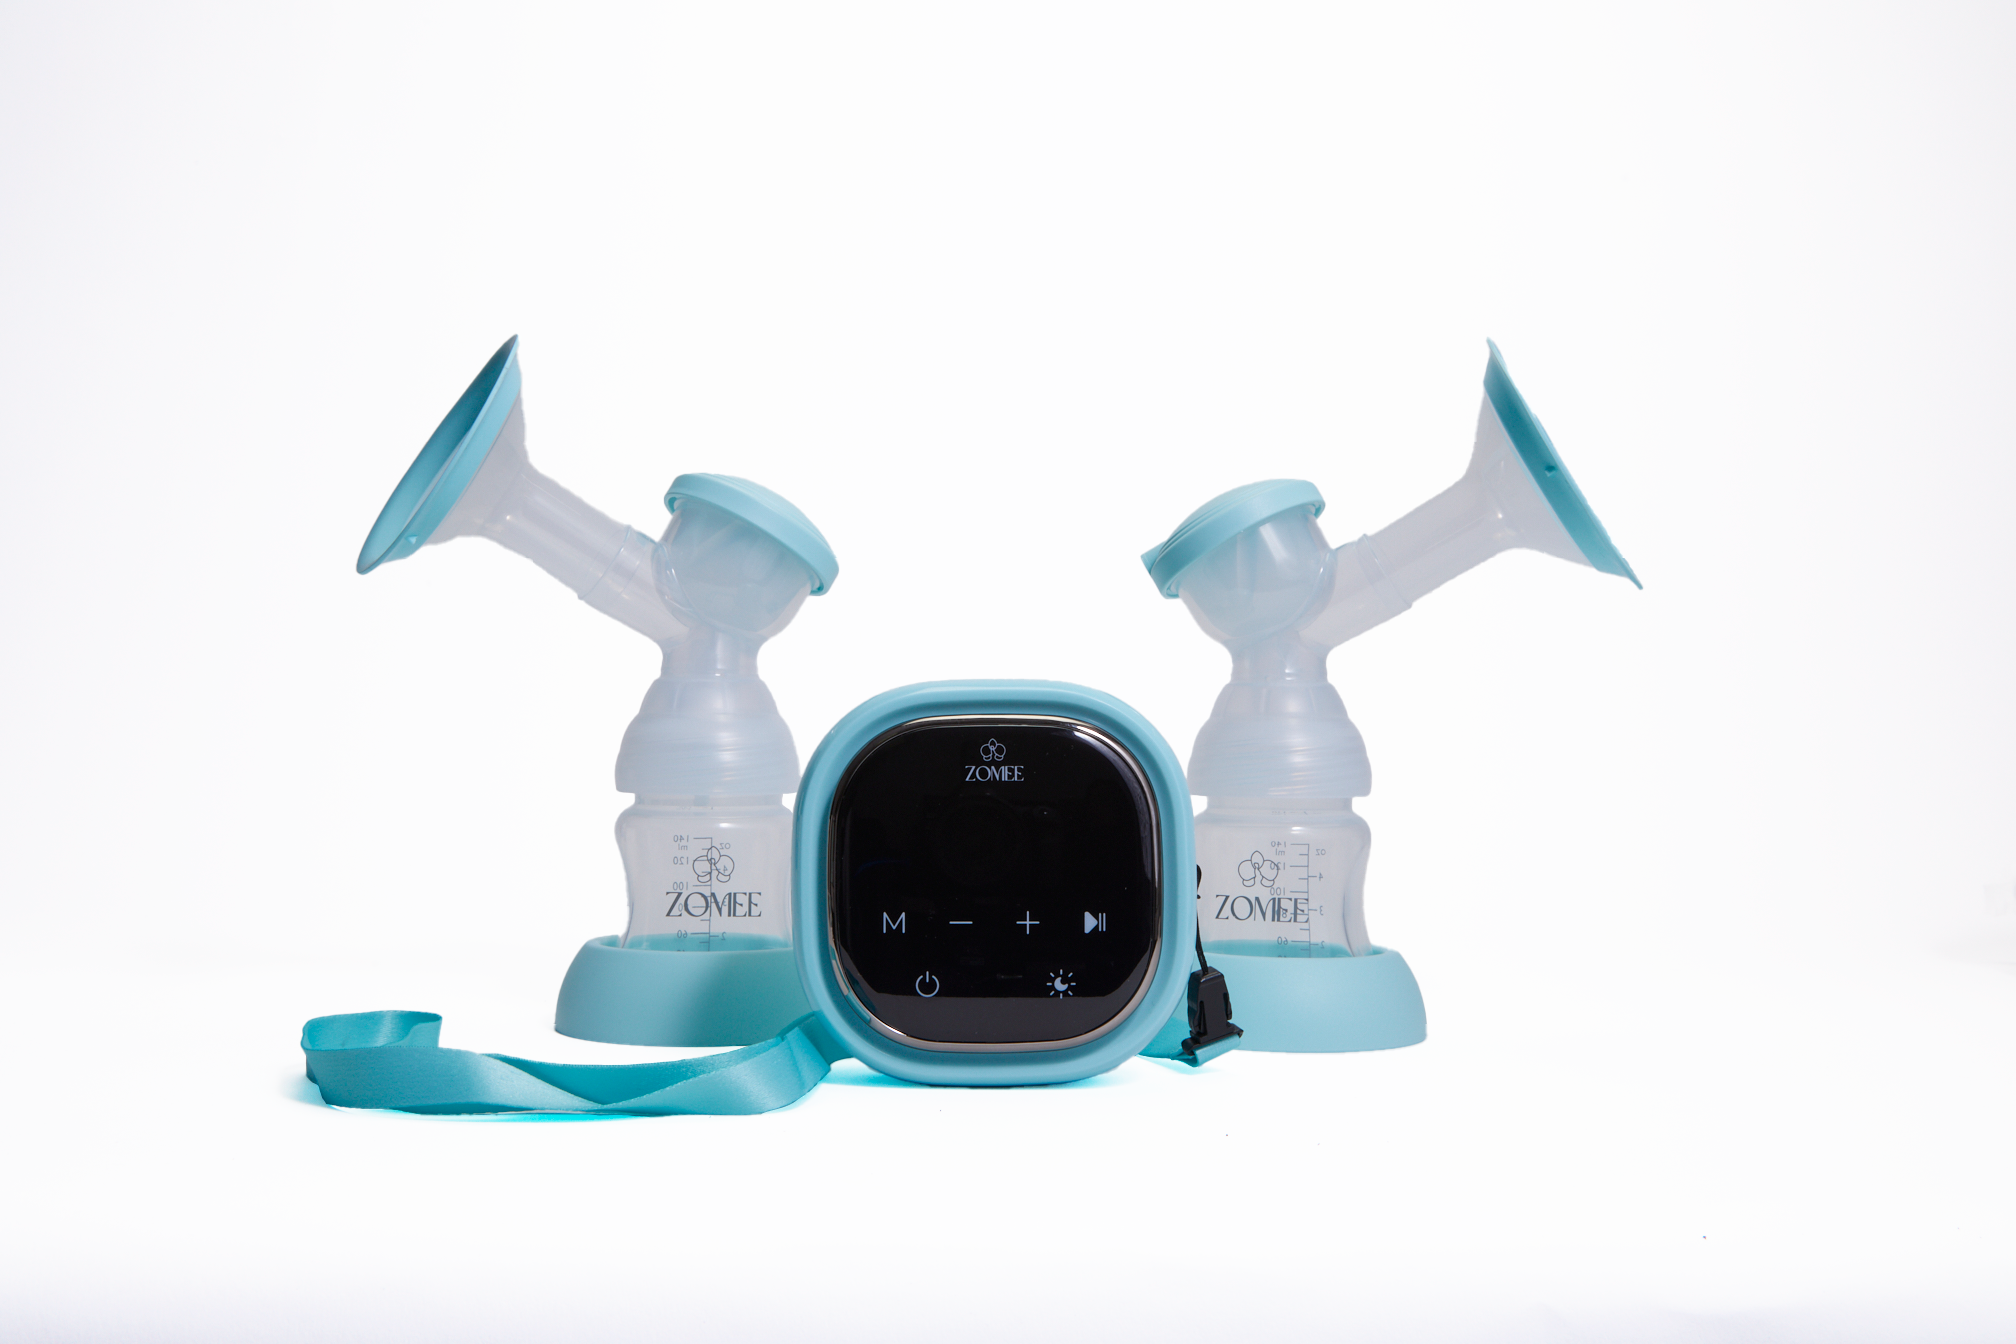 Z2 Double Electric Breast Pump